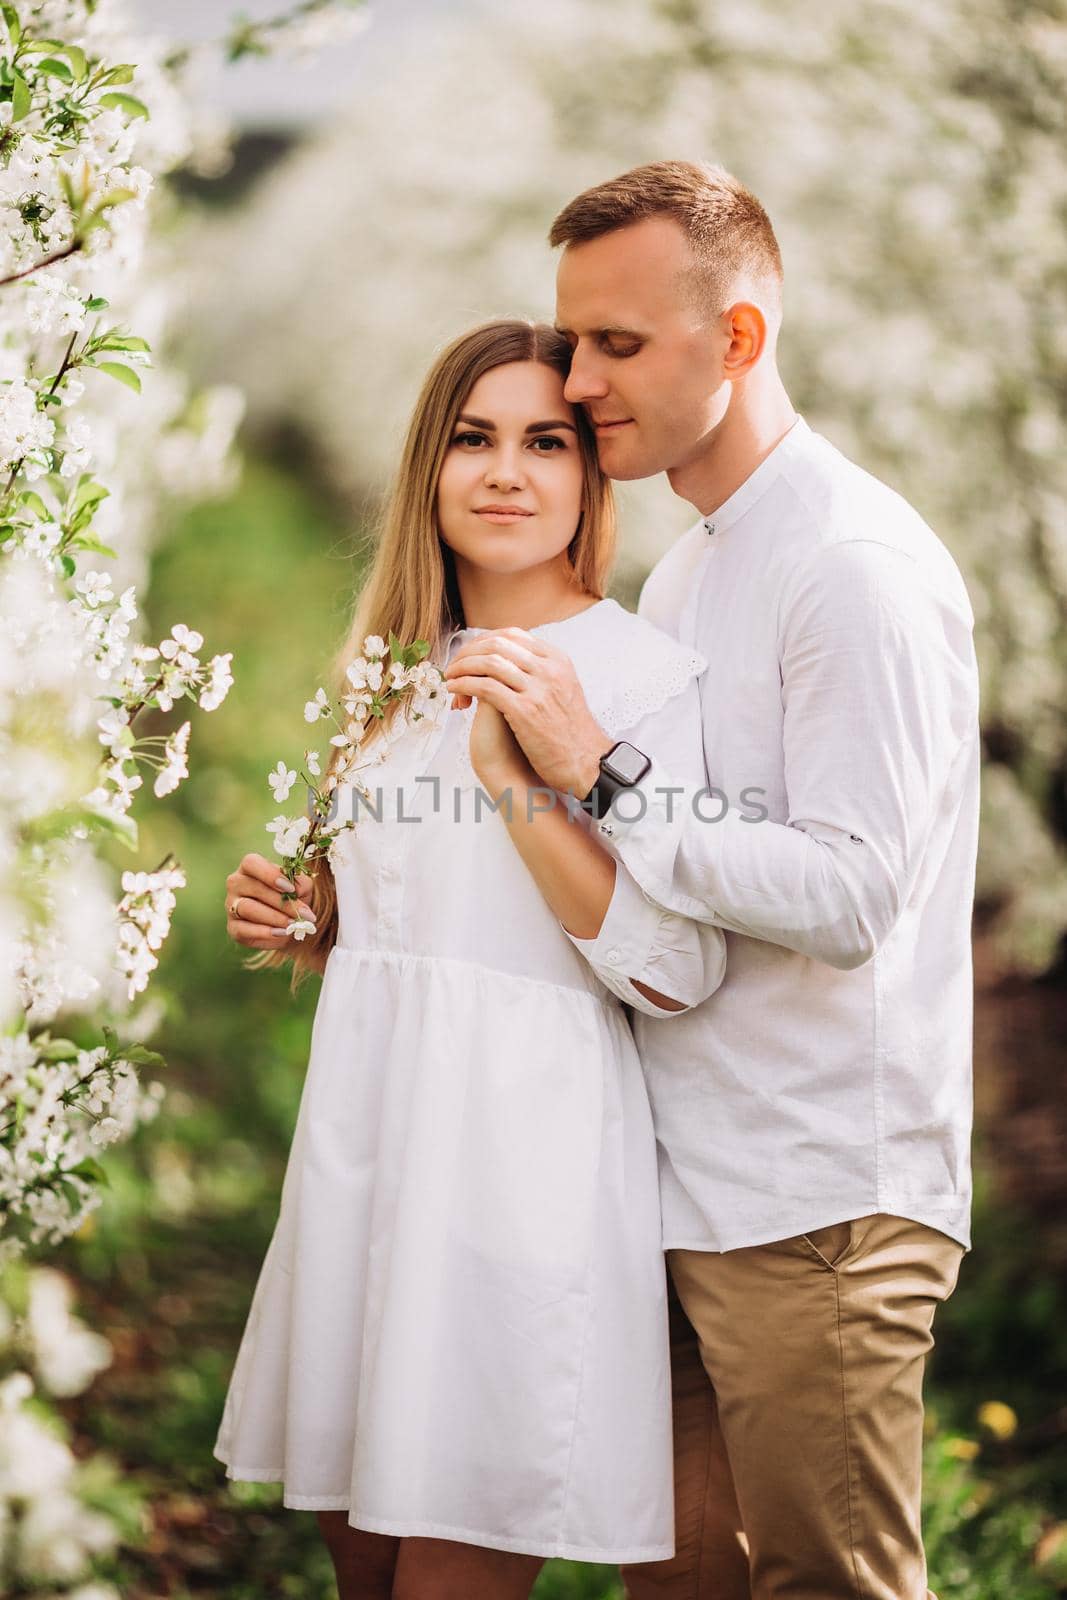 A happy young couple in love stands in a garden of blooming apple trees. A man in a white shirt and a girl in a white light dress are walking in a flowering park